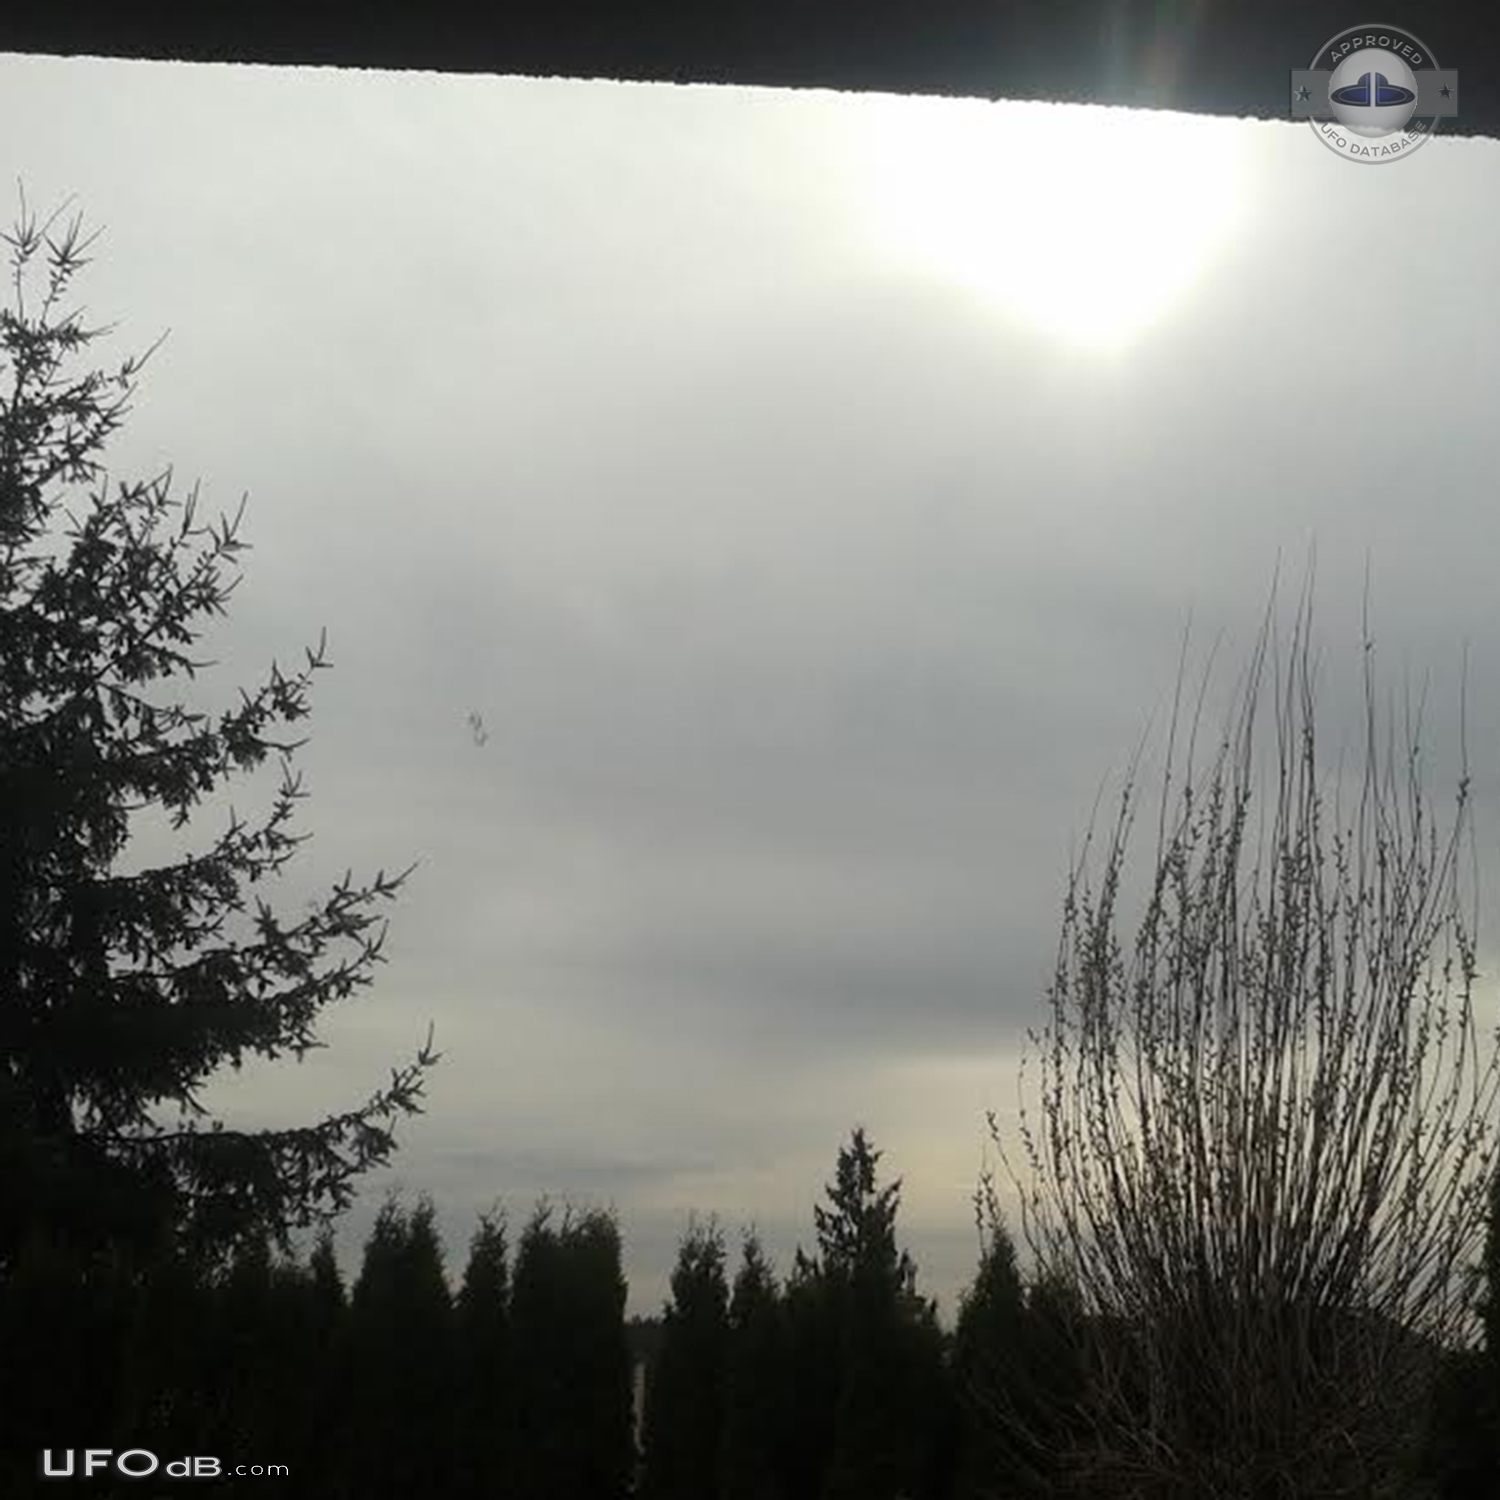 3 bright lights UFOs not too far up in the sky sitting still - Canada UFO Picture #674-4